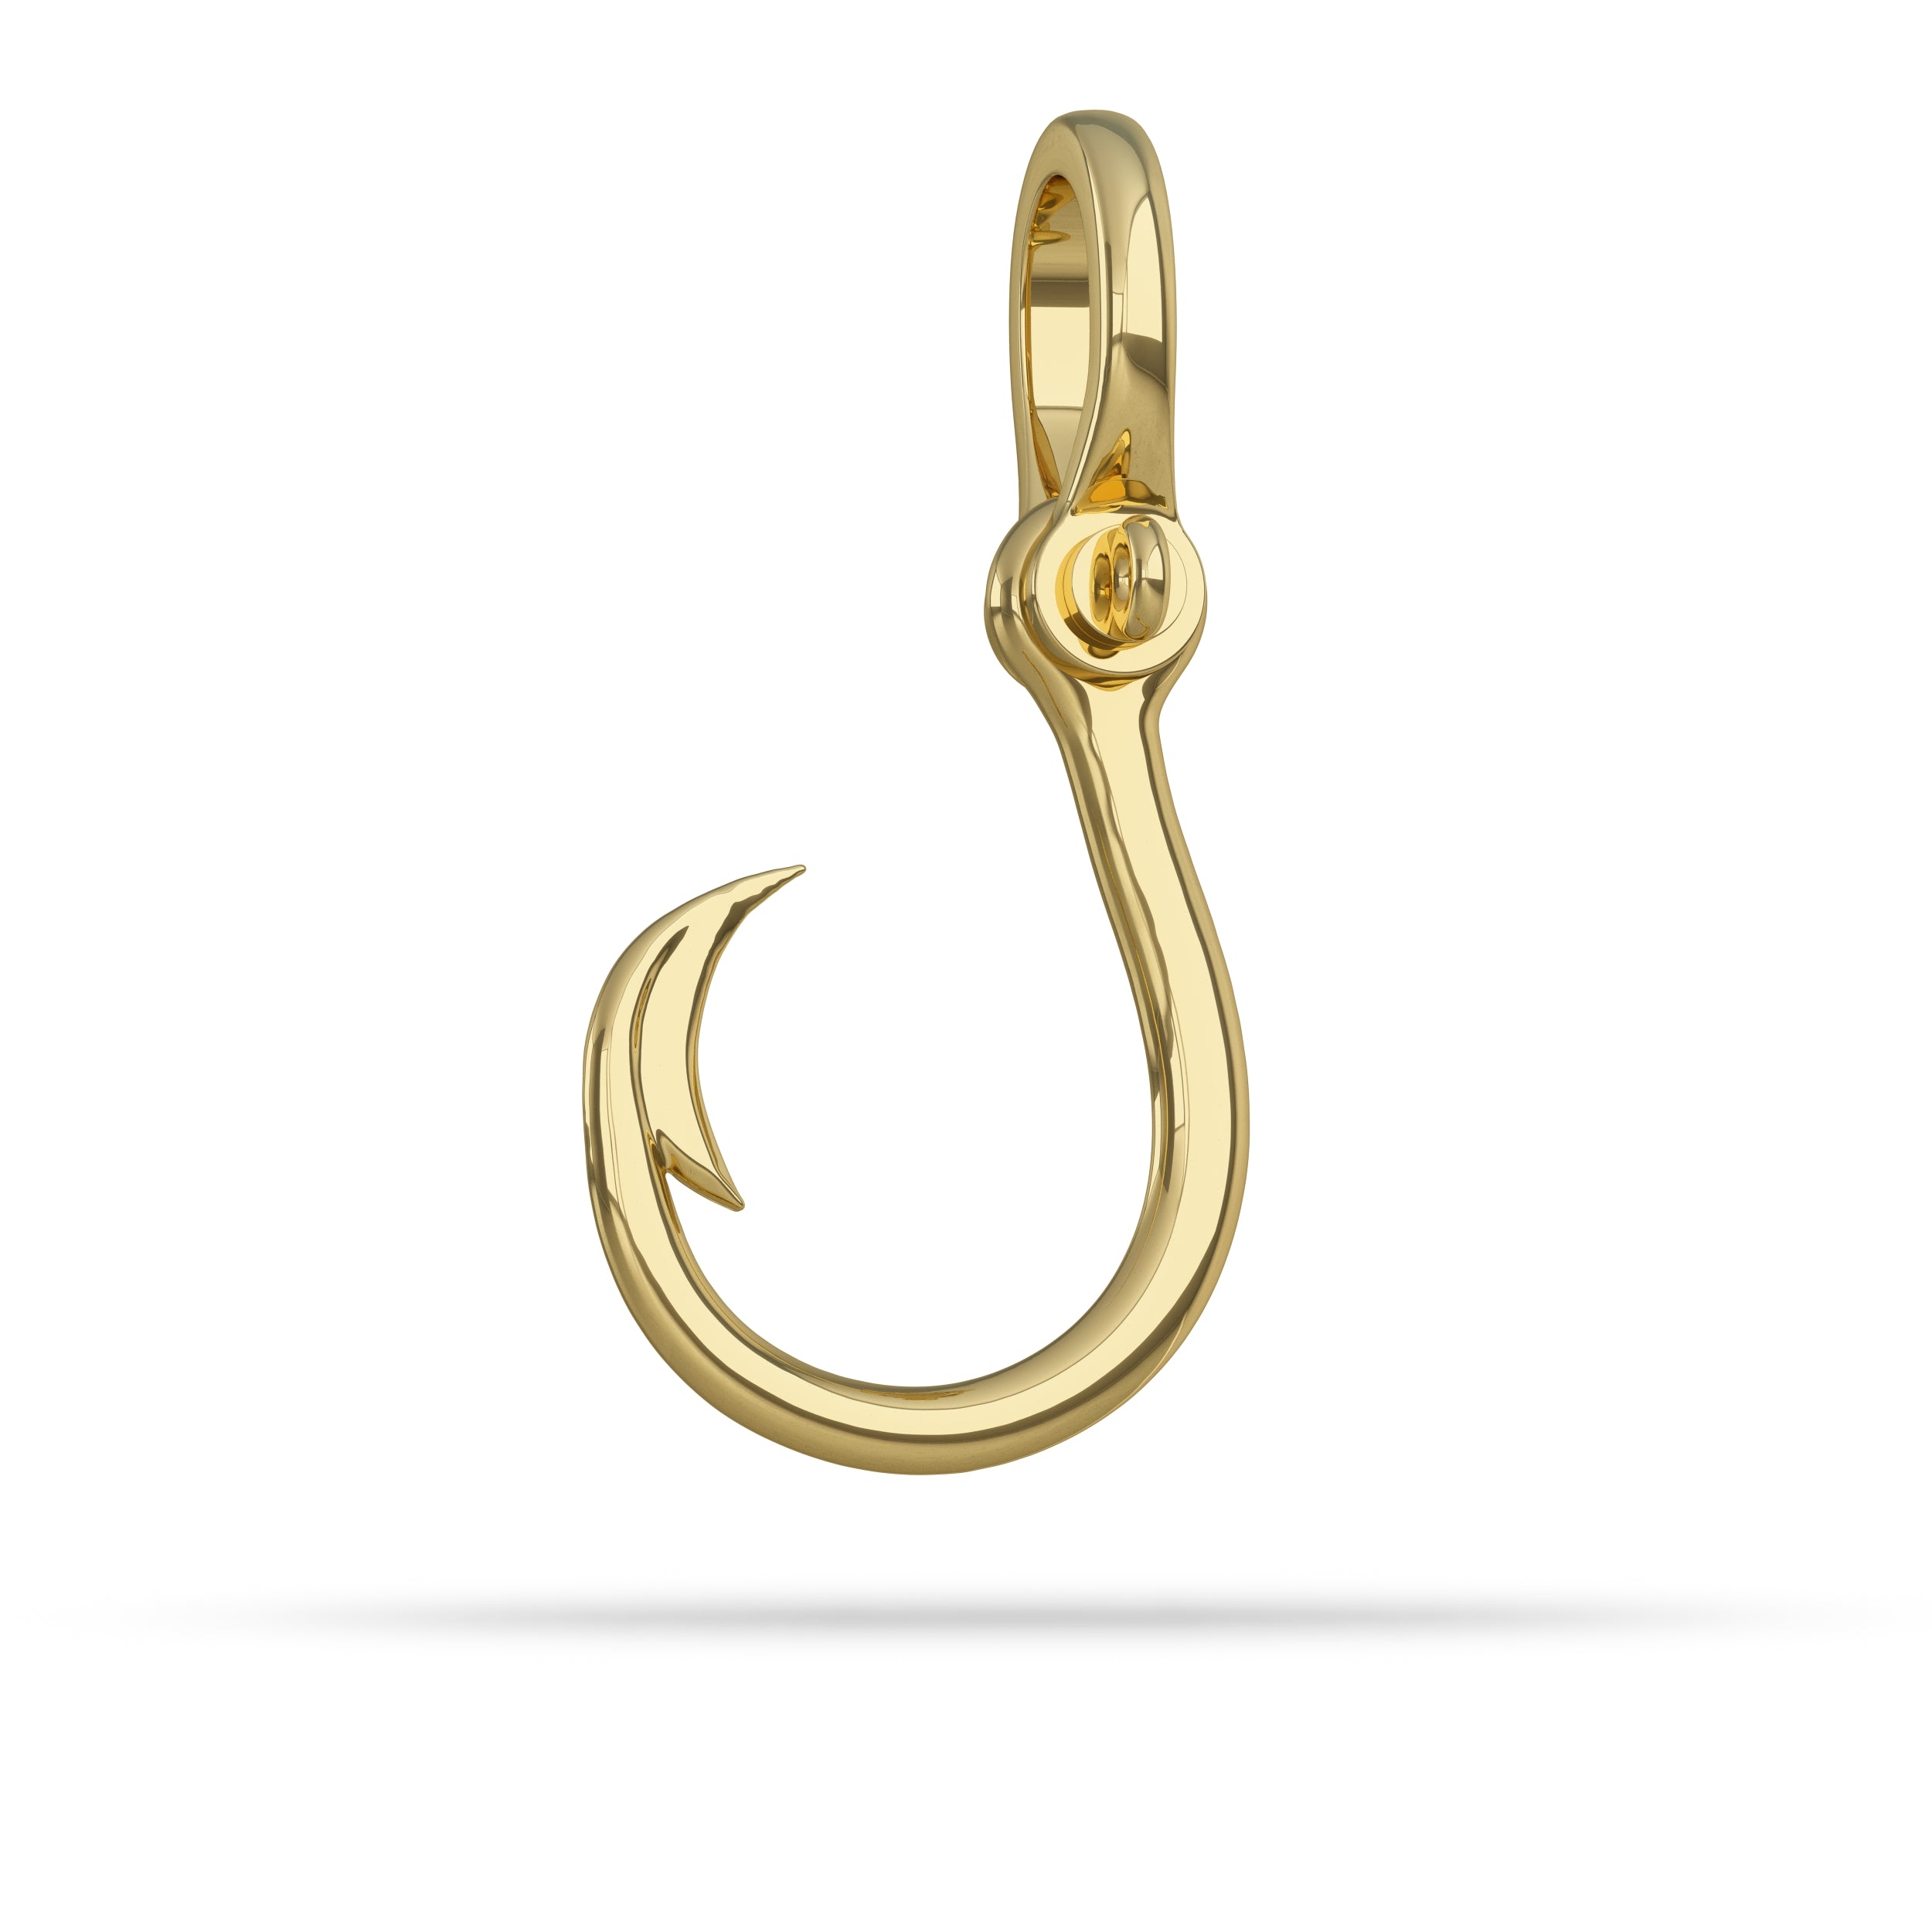 Small Gold fishing hook pendant with Shackle Bail 